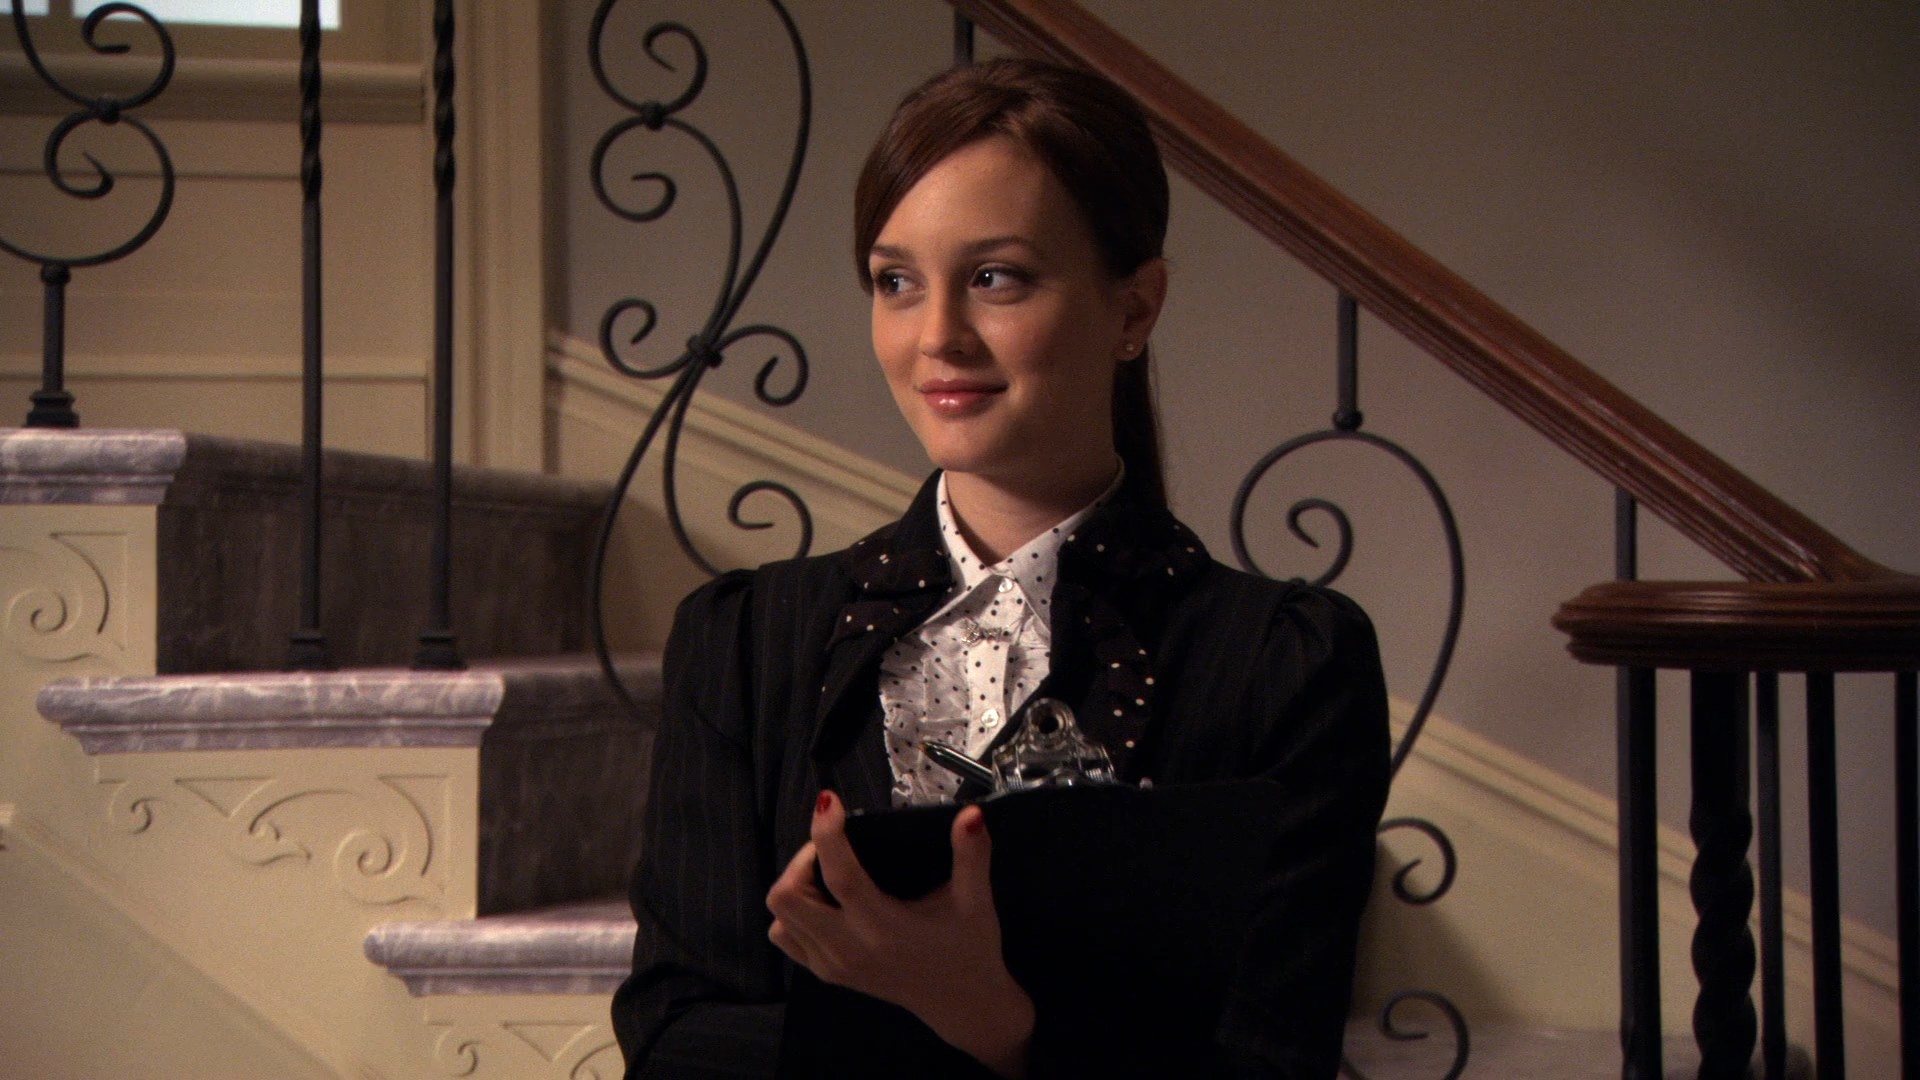 51 Badass Blair Waldorf Quotes For Every Gossip Girl Fan To